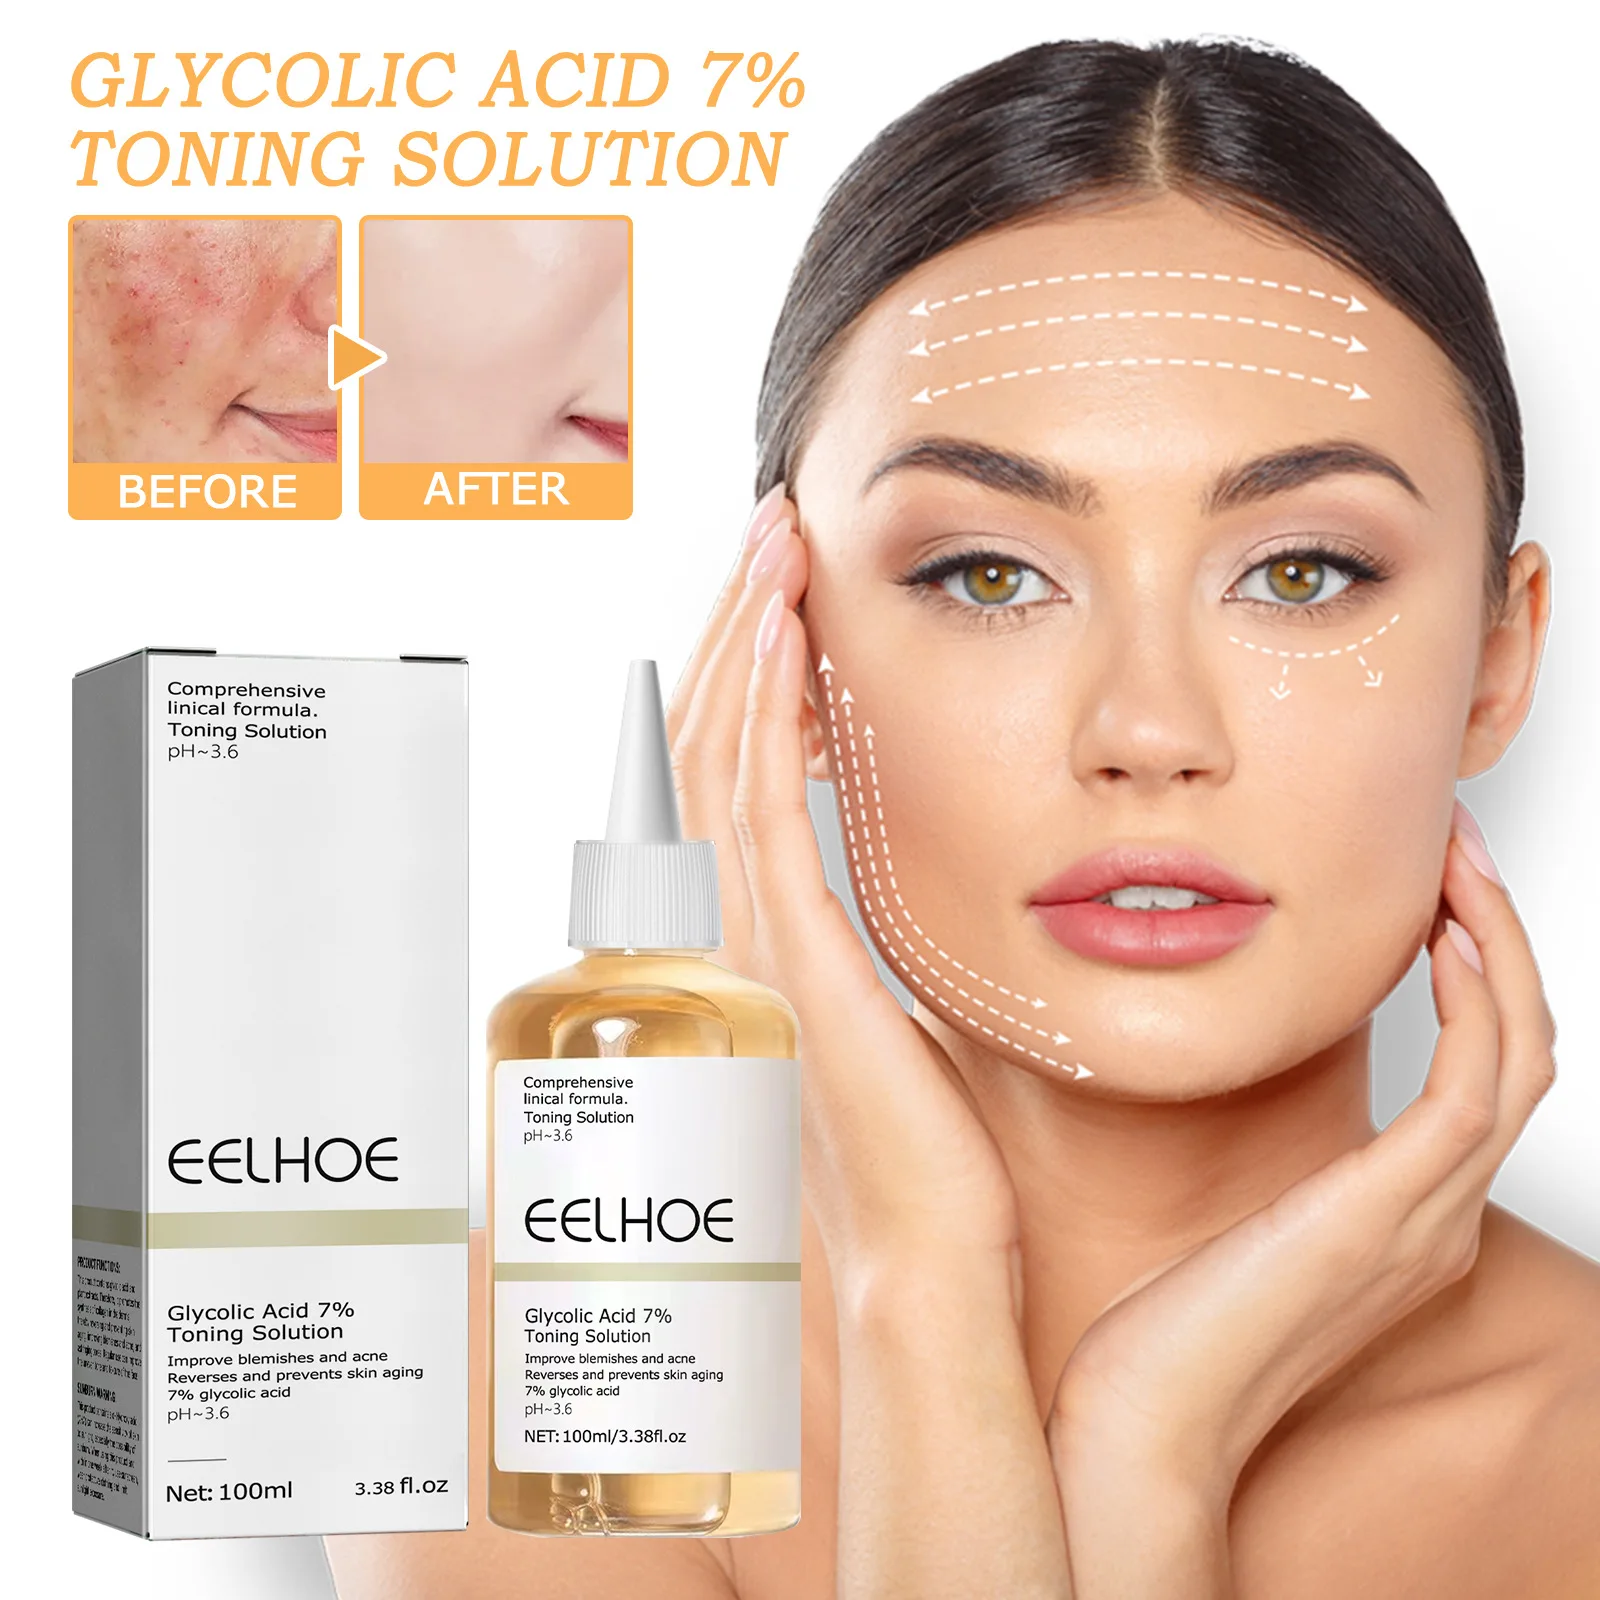 

Anti Aging Face Toner Glycolic Acid 7% Toning Solution Acne Remover Lifting Firming Wrinkles Glowing Facial Skin Care